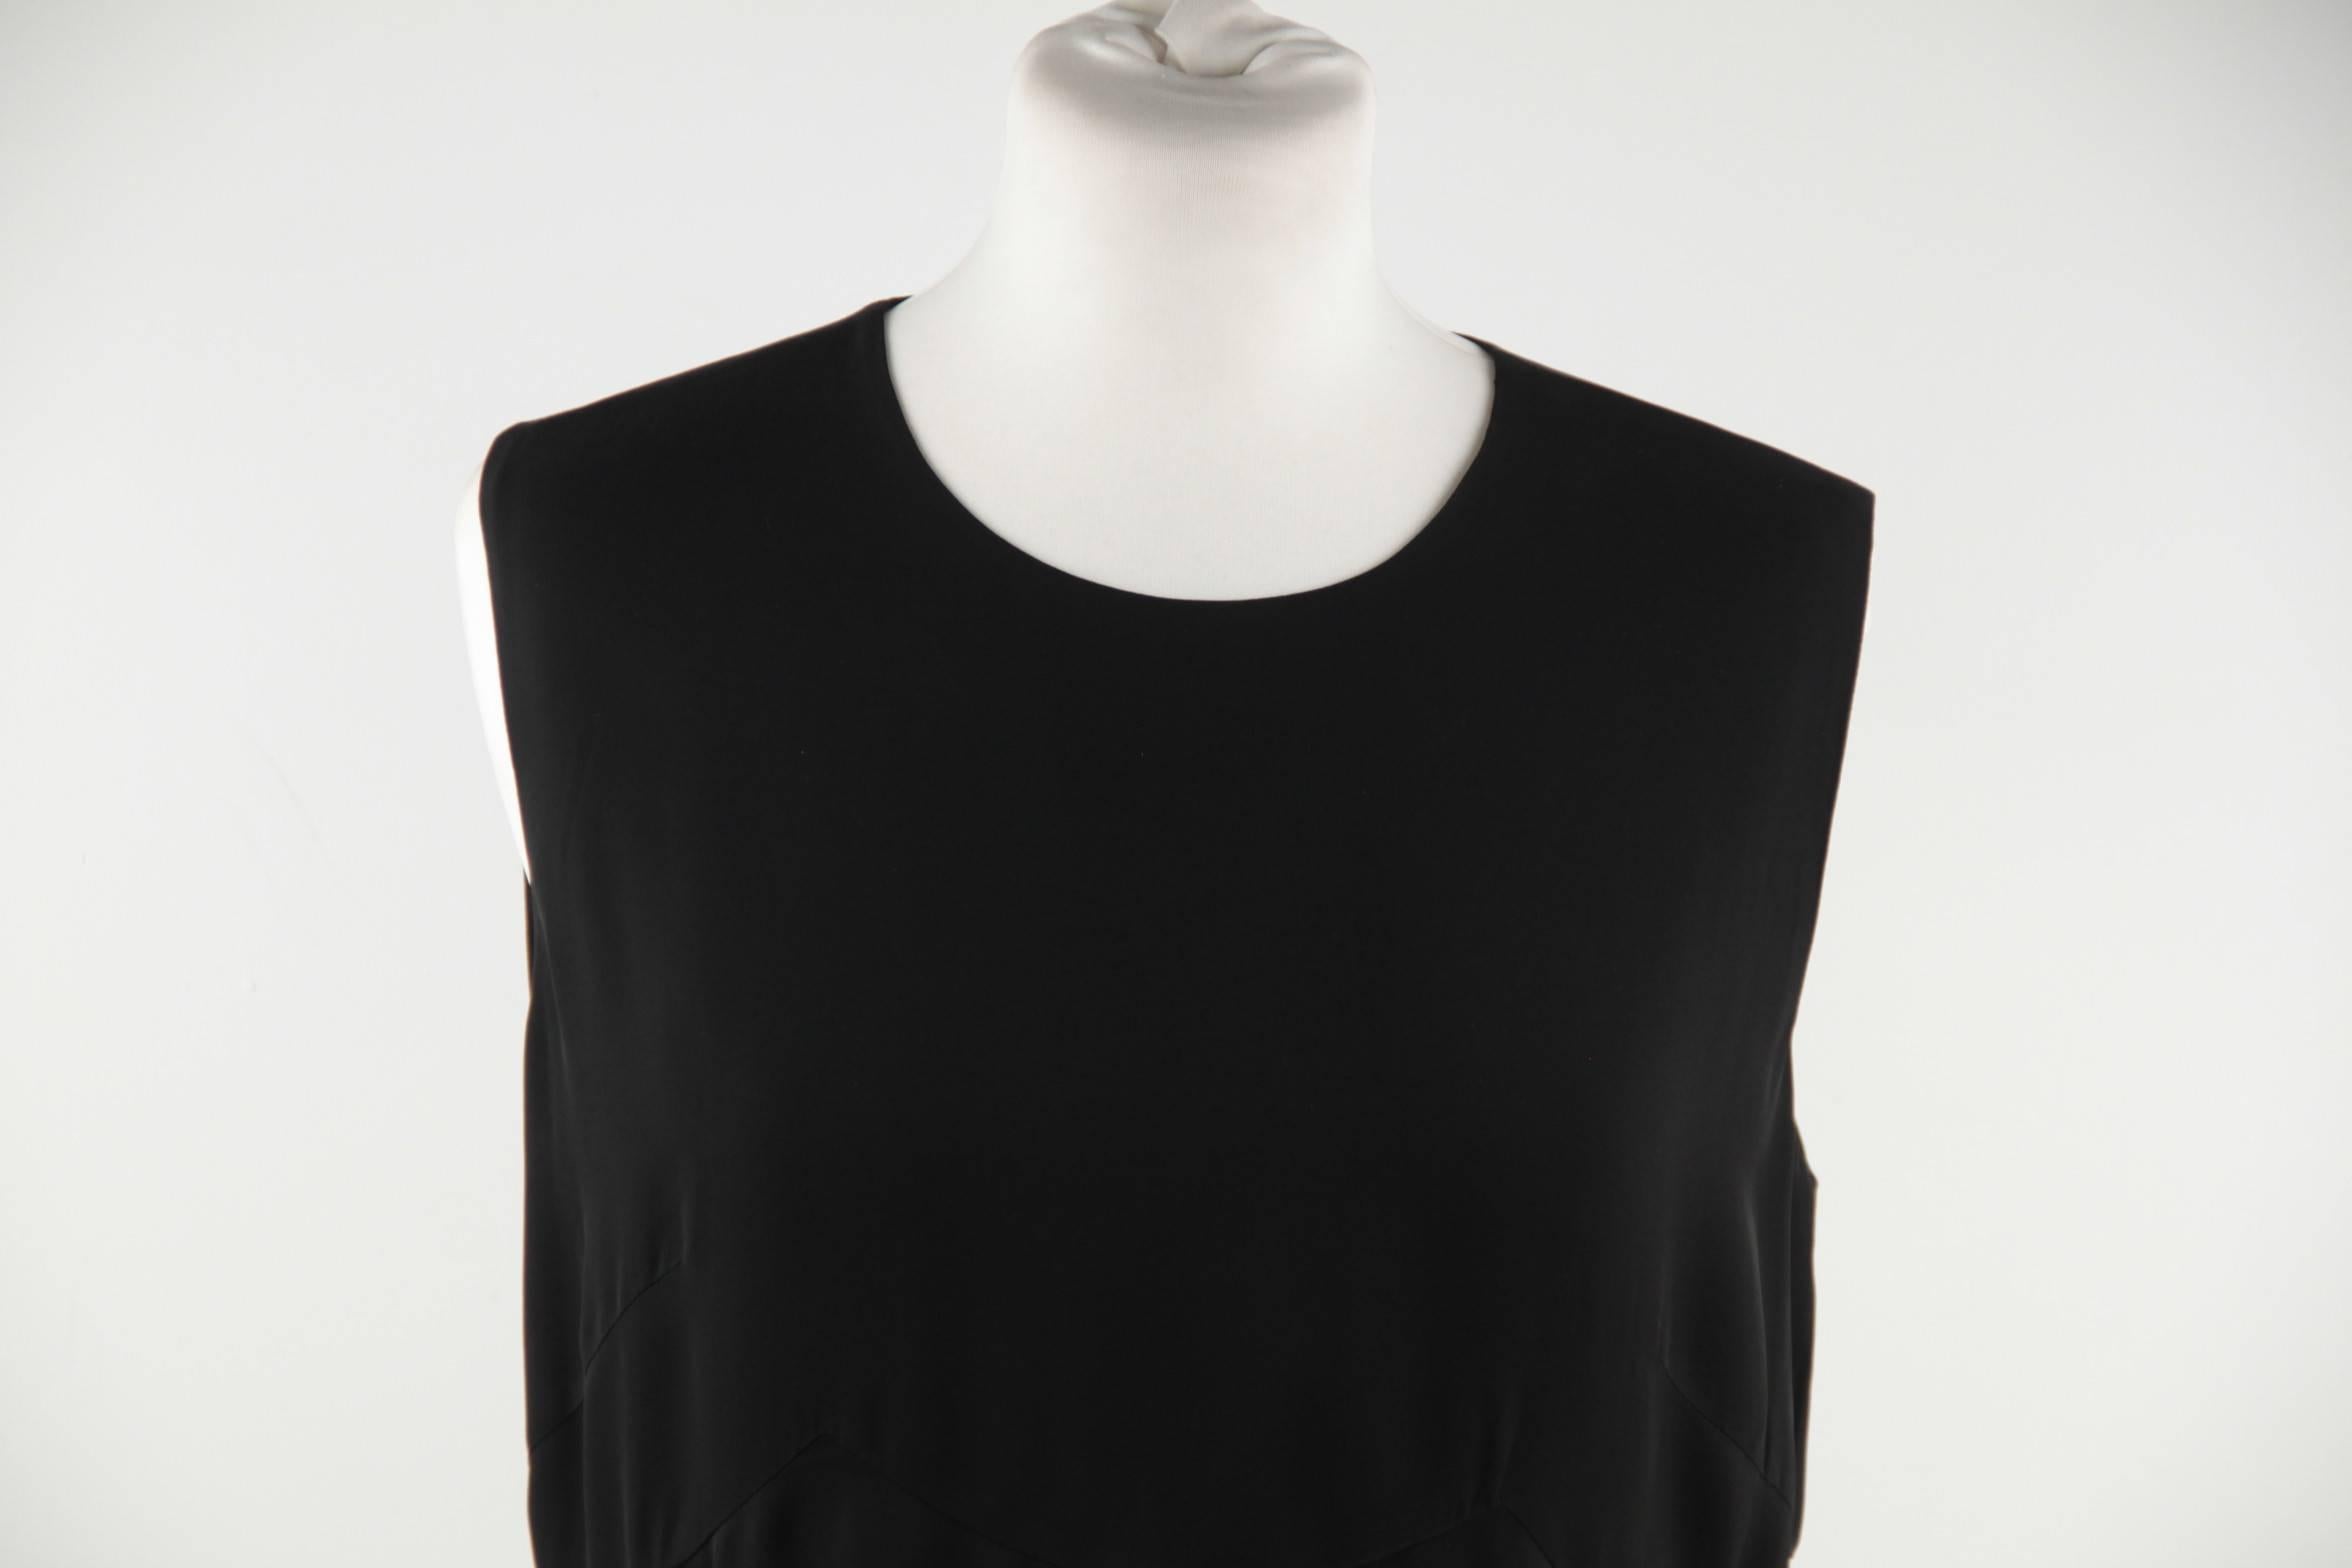 - Black 100% Viscose fabric

- Sleeveless styling

- Round neckline

- Rear zip closure

- Pleated hem
- Size: 44 IT (The size shown for this item is the size indicated by the designer on the label) It should correspond to a MEDIUM